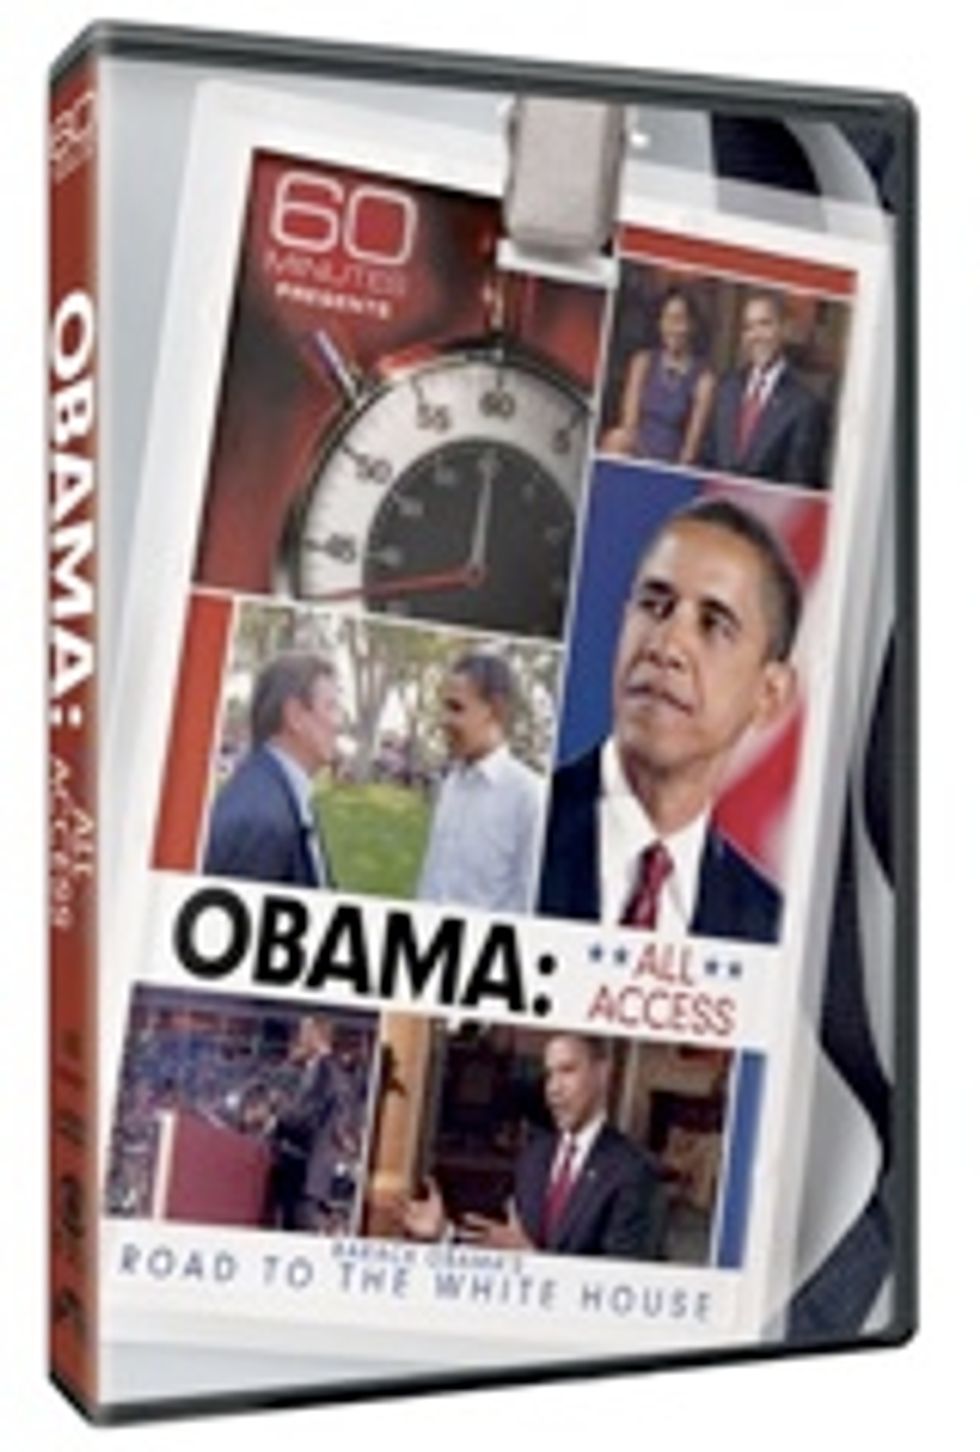 CBS Collects Obama's Speeches & Interviews, To Make You People Swoon